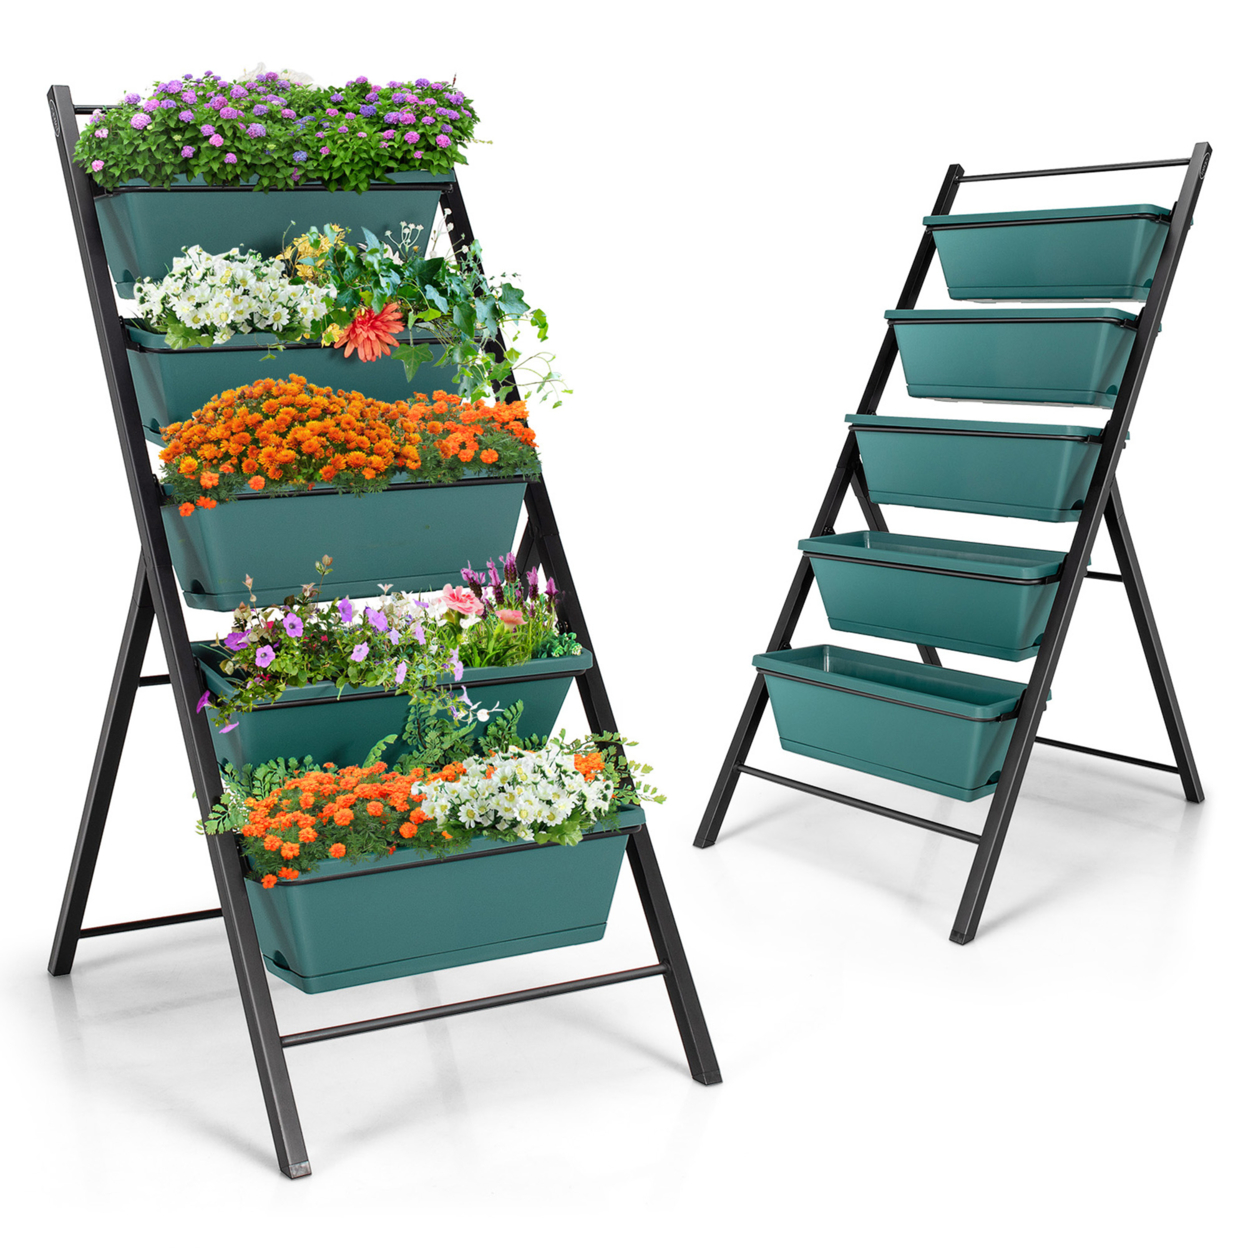 2PCS 5-Tier Vertical Raised Garden Bed Elevated Planter 5 Container Box - Green